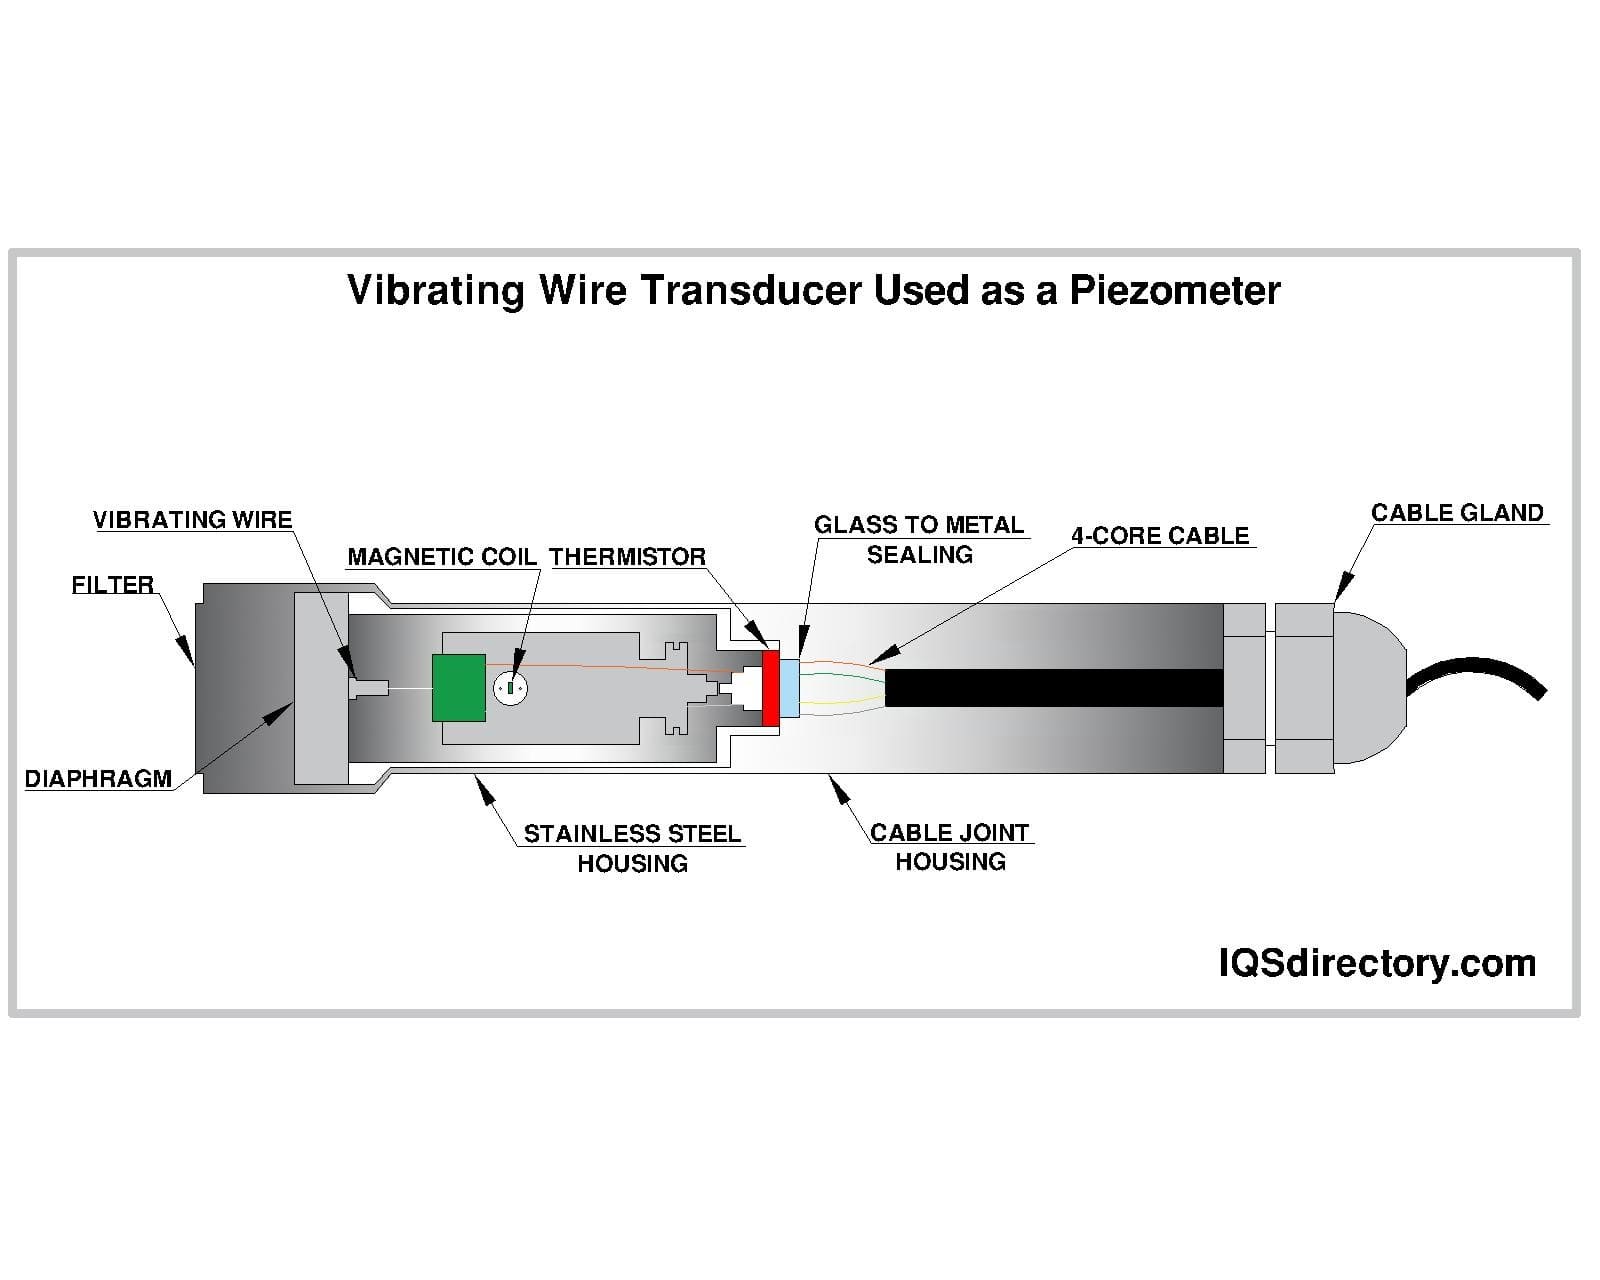 Vibrating Wire Transducer Used as a Piezometer